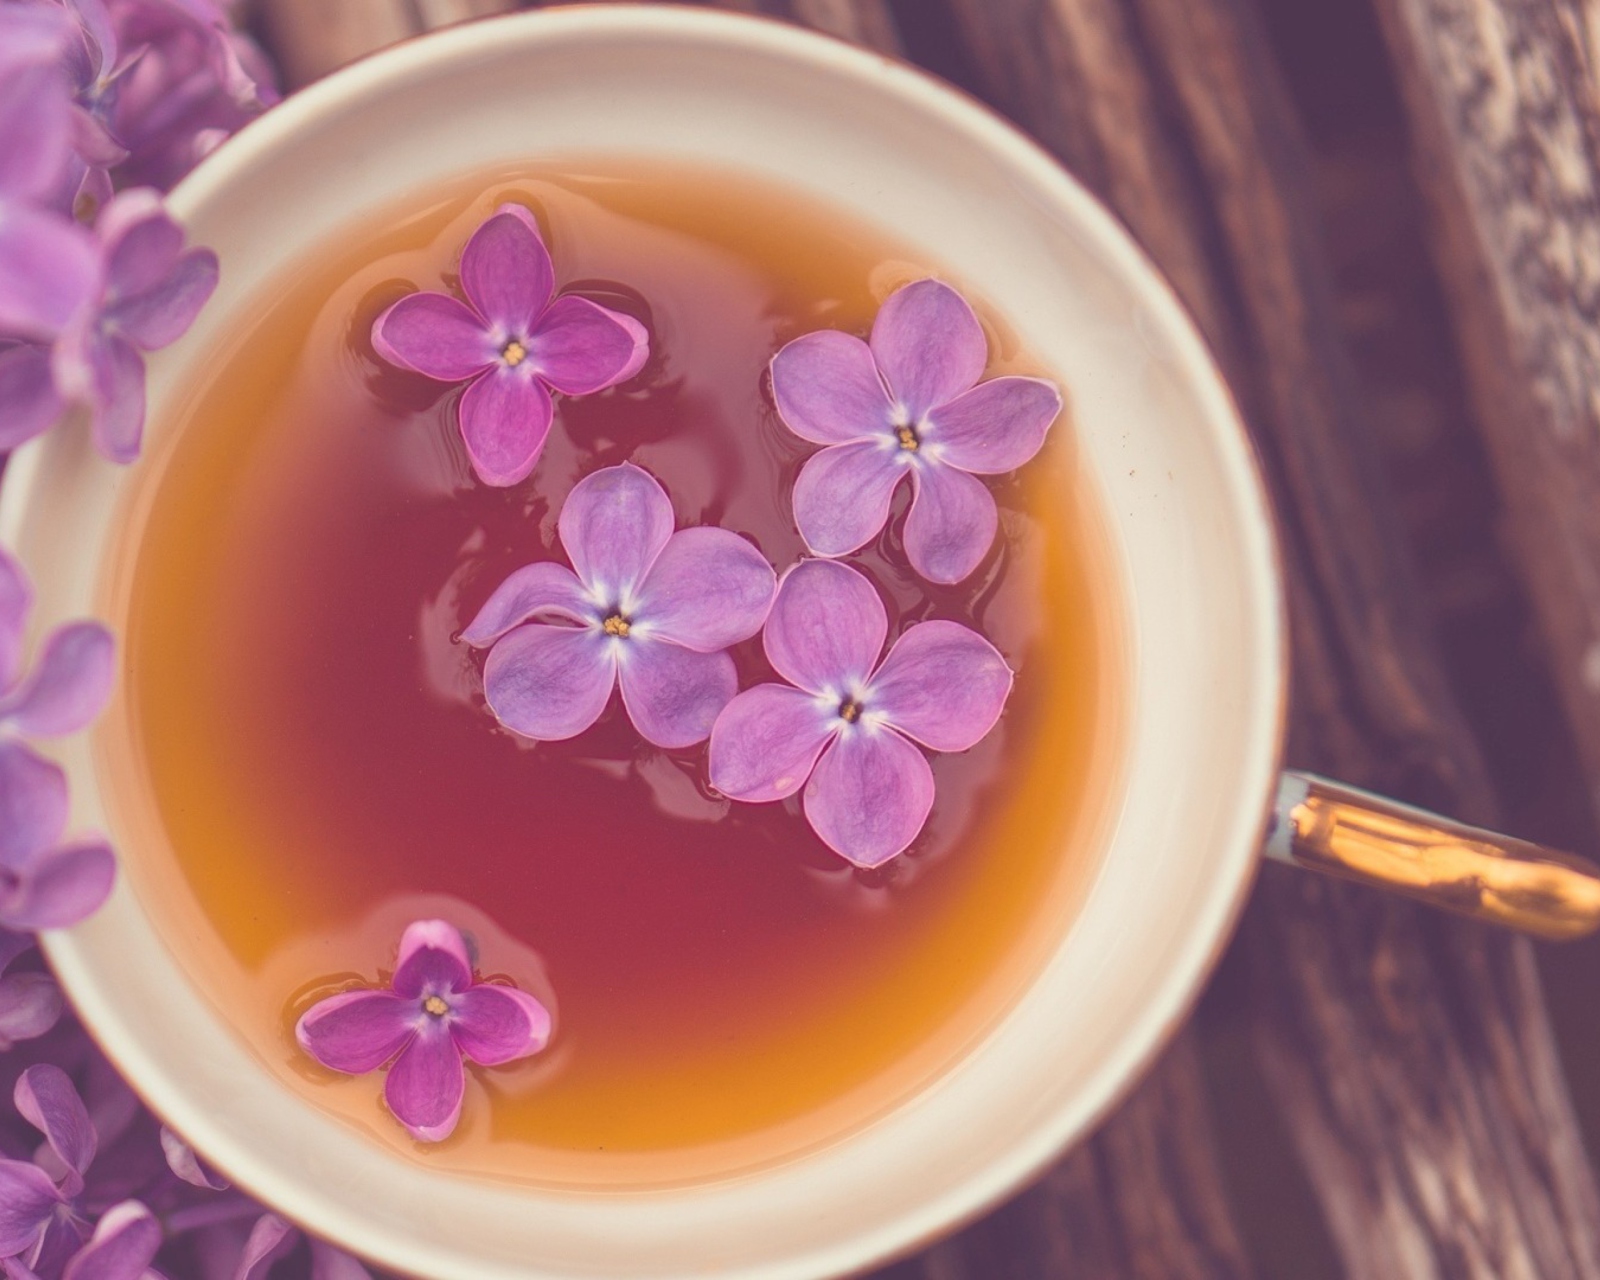 Cup Of Tea And Lilac Flowers wallpaper 1600x1280